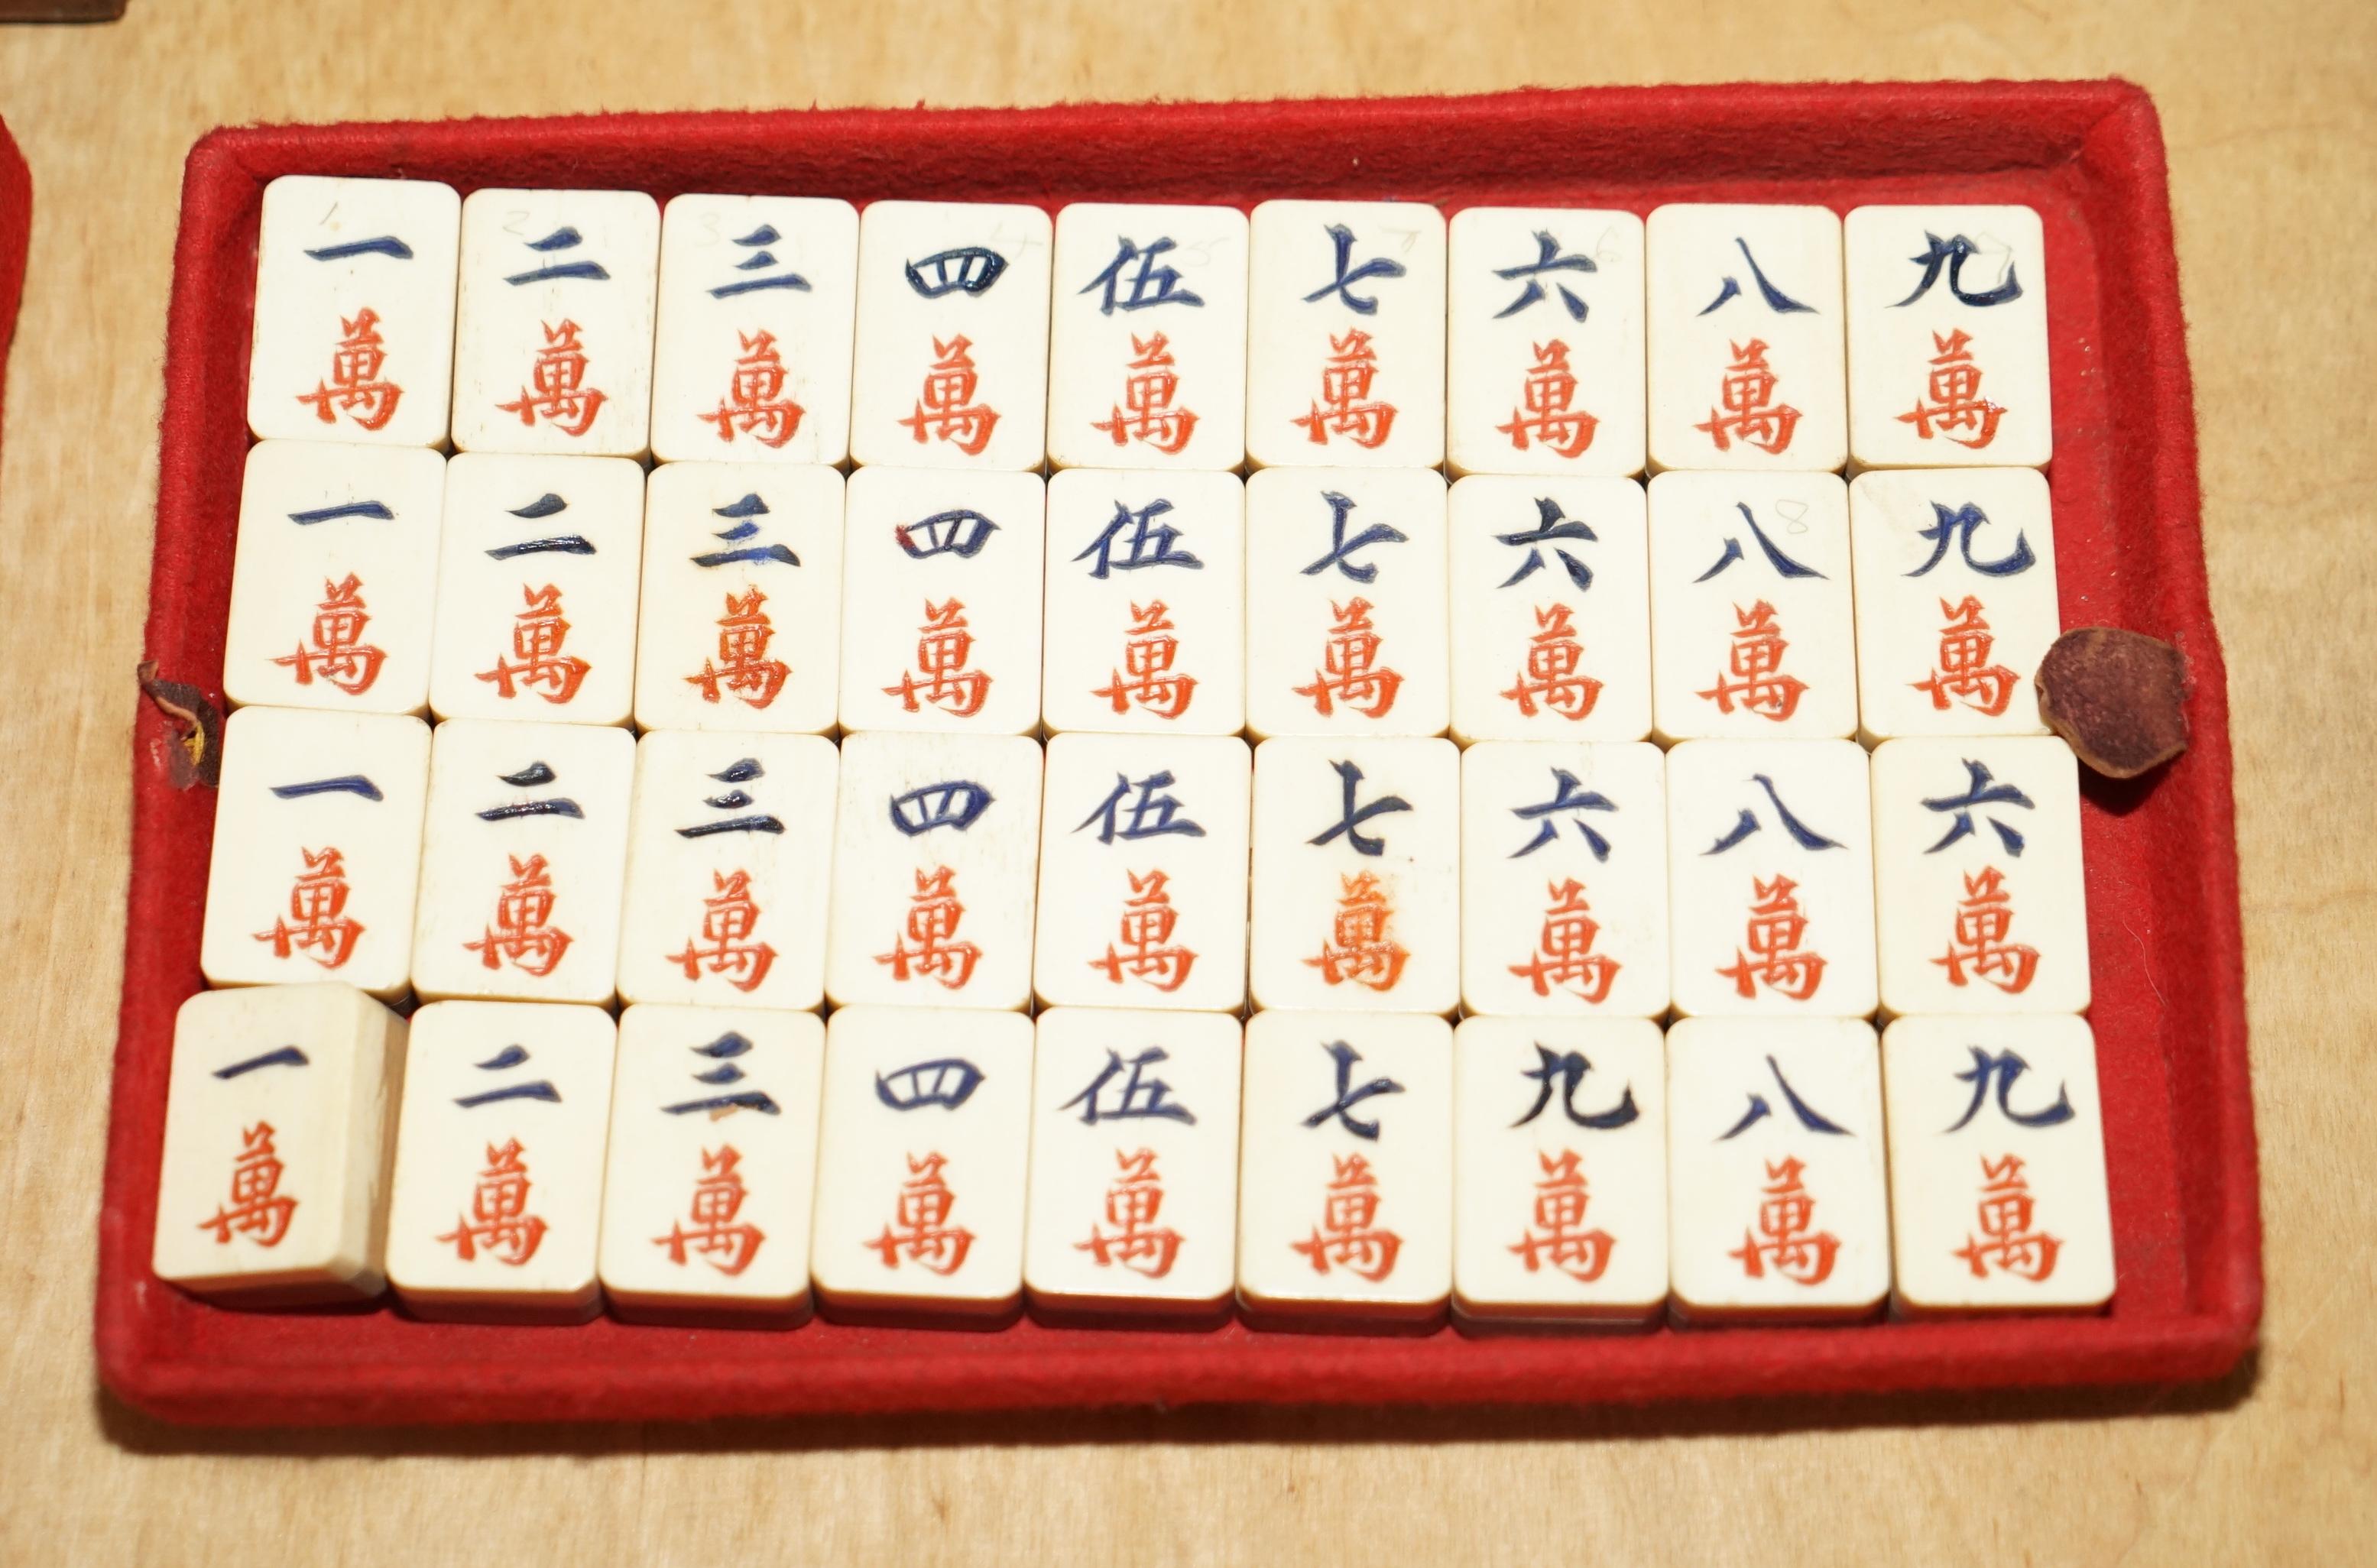 Bamboo Stunning Original Chinese circa 1900-1920 Mahjong Set Including Counters For Sale